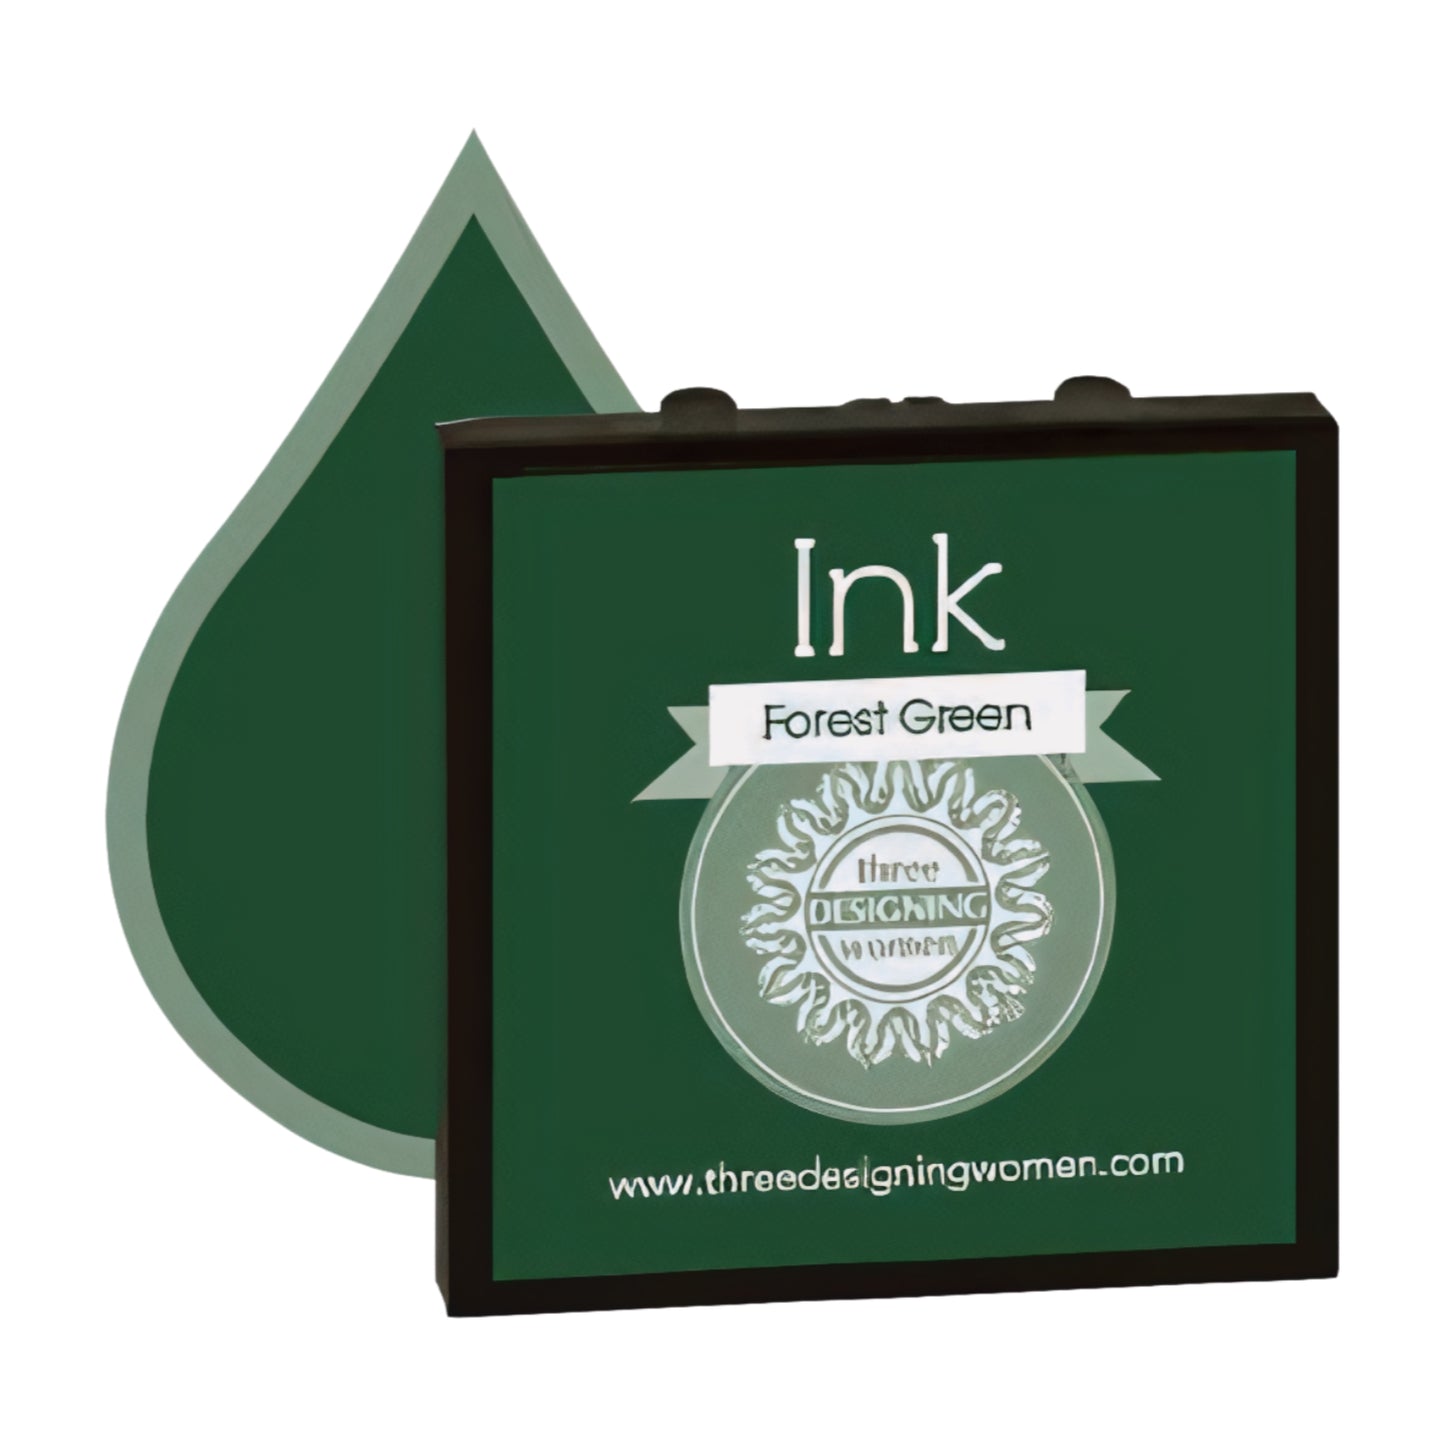 Ink Replacement Cartridge "Forest Green" for Self-Inking Stampers Three Designing Women